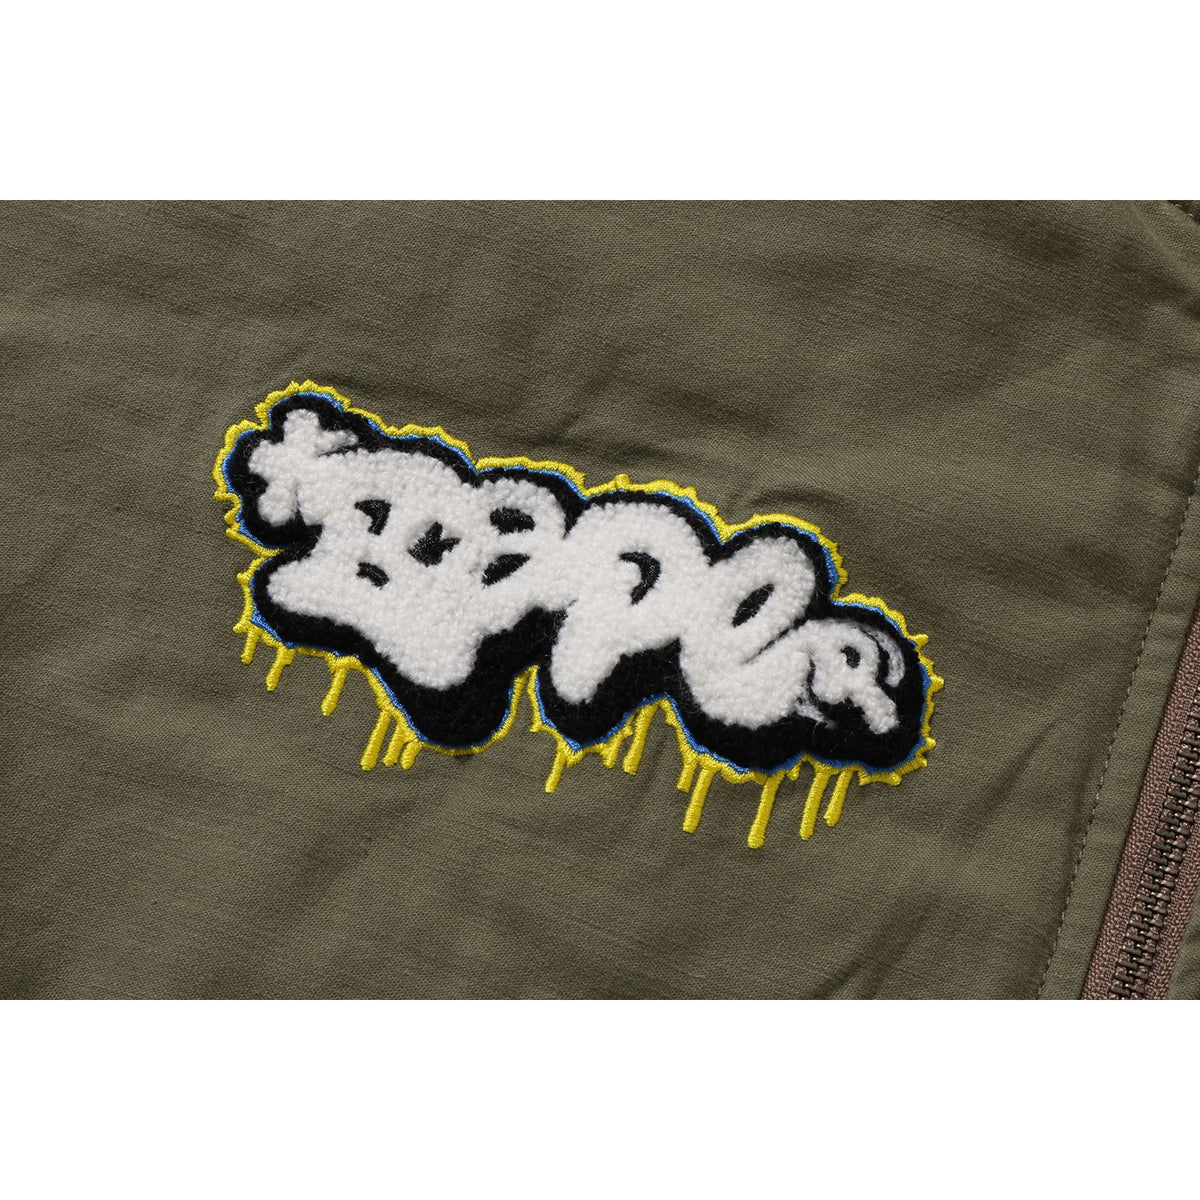 GRAFFITI BOMBER JACKET RELAXED FIT MENS